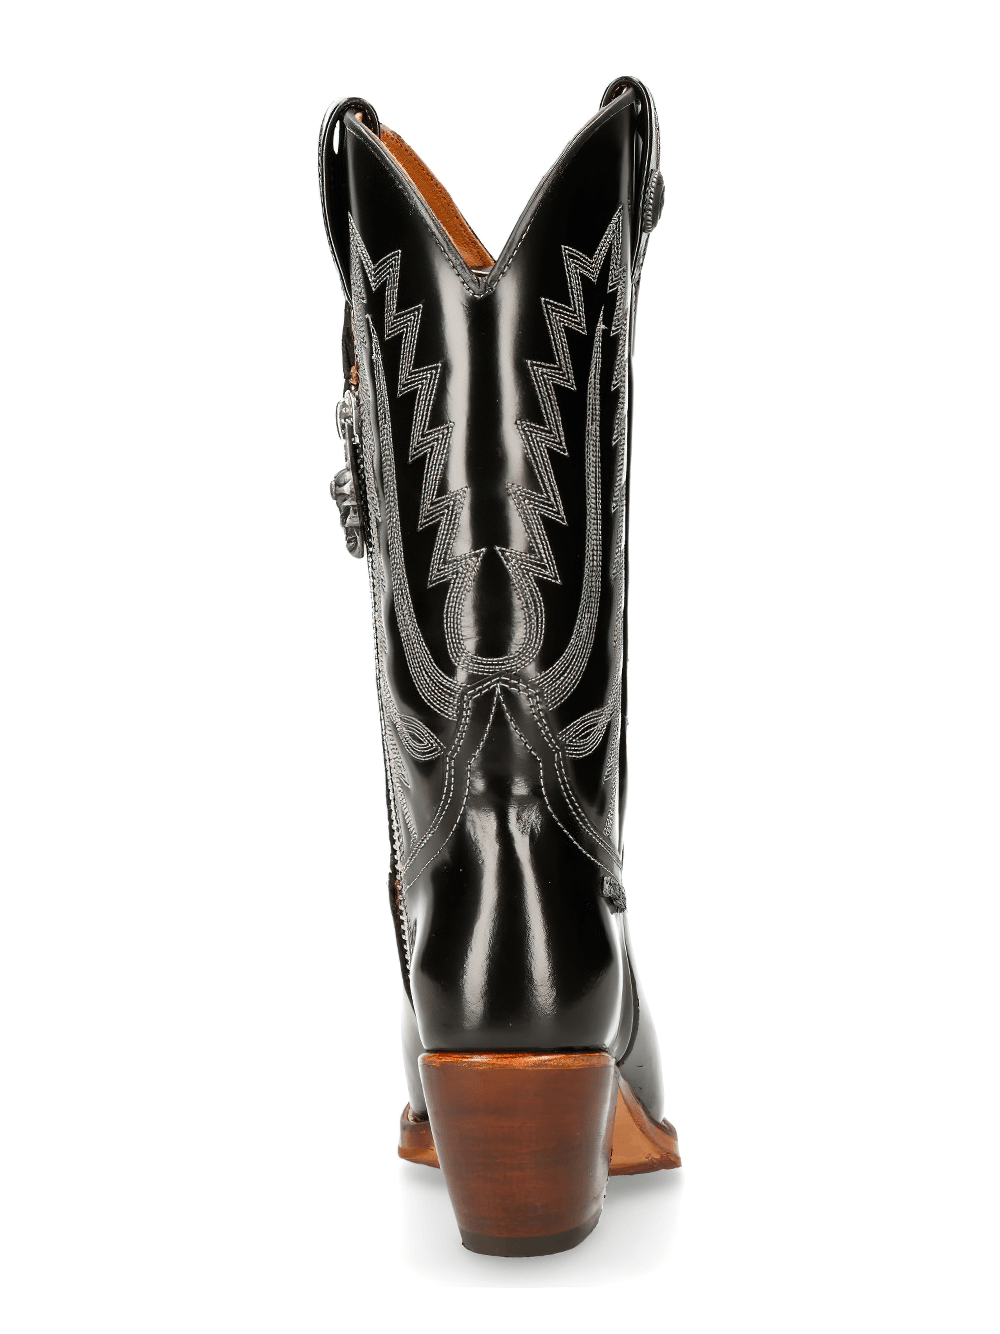 NEW ROCK Black Western Zipper High Boots for Ladies